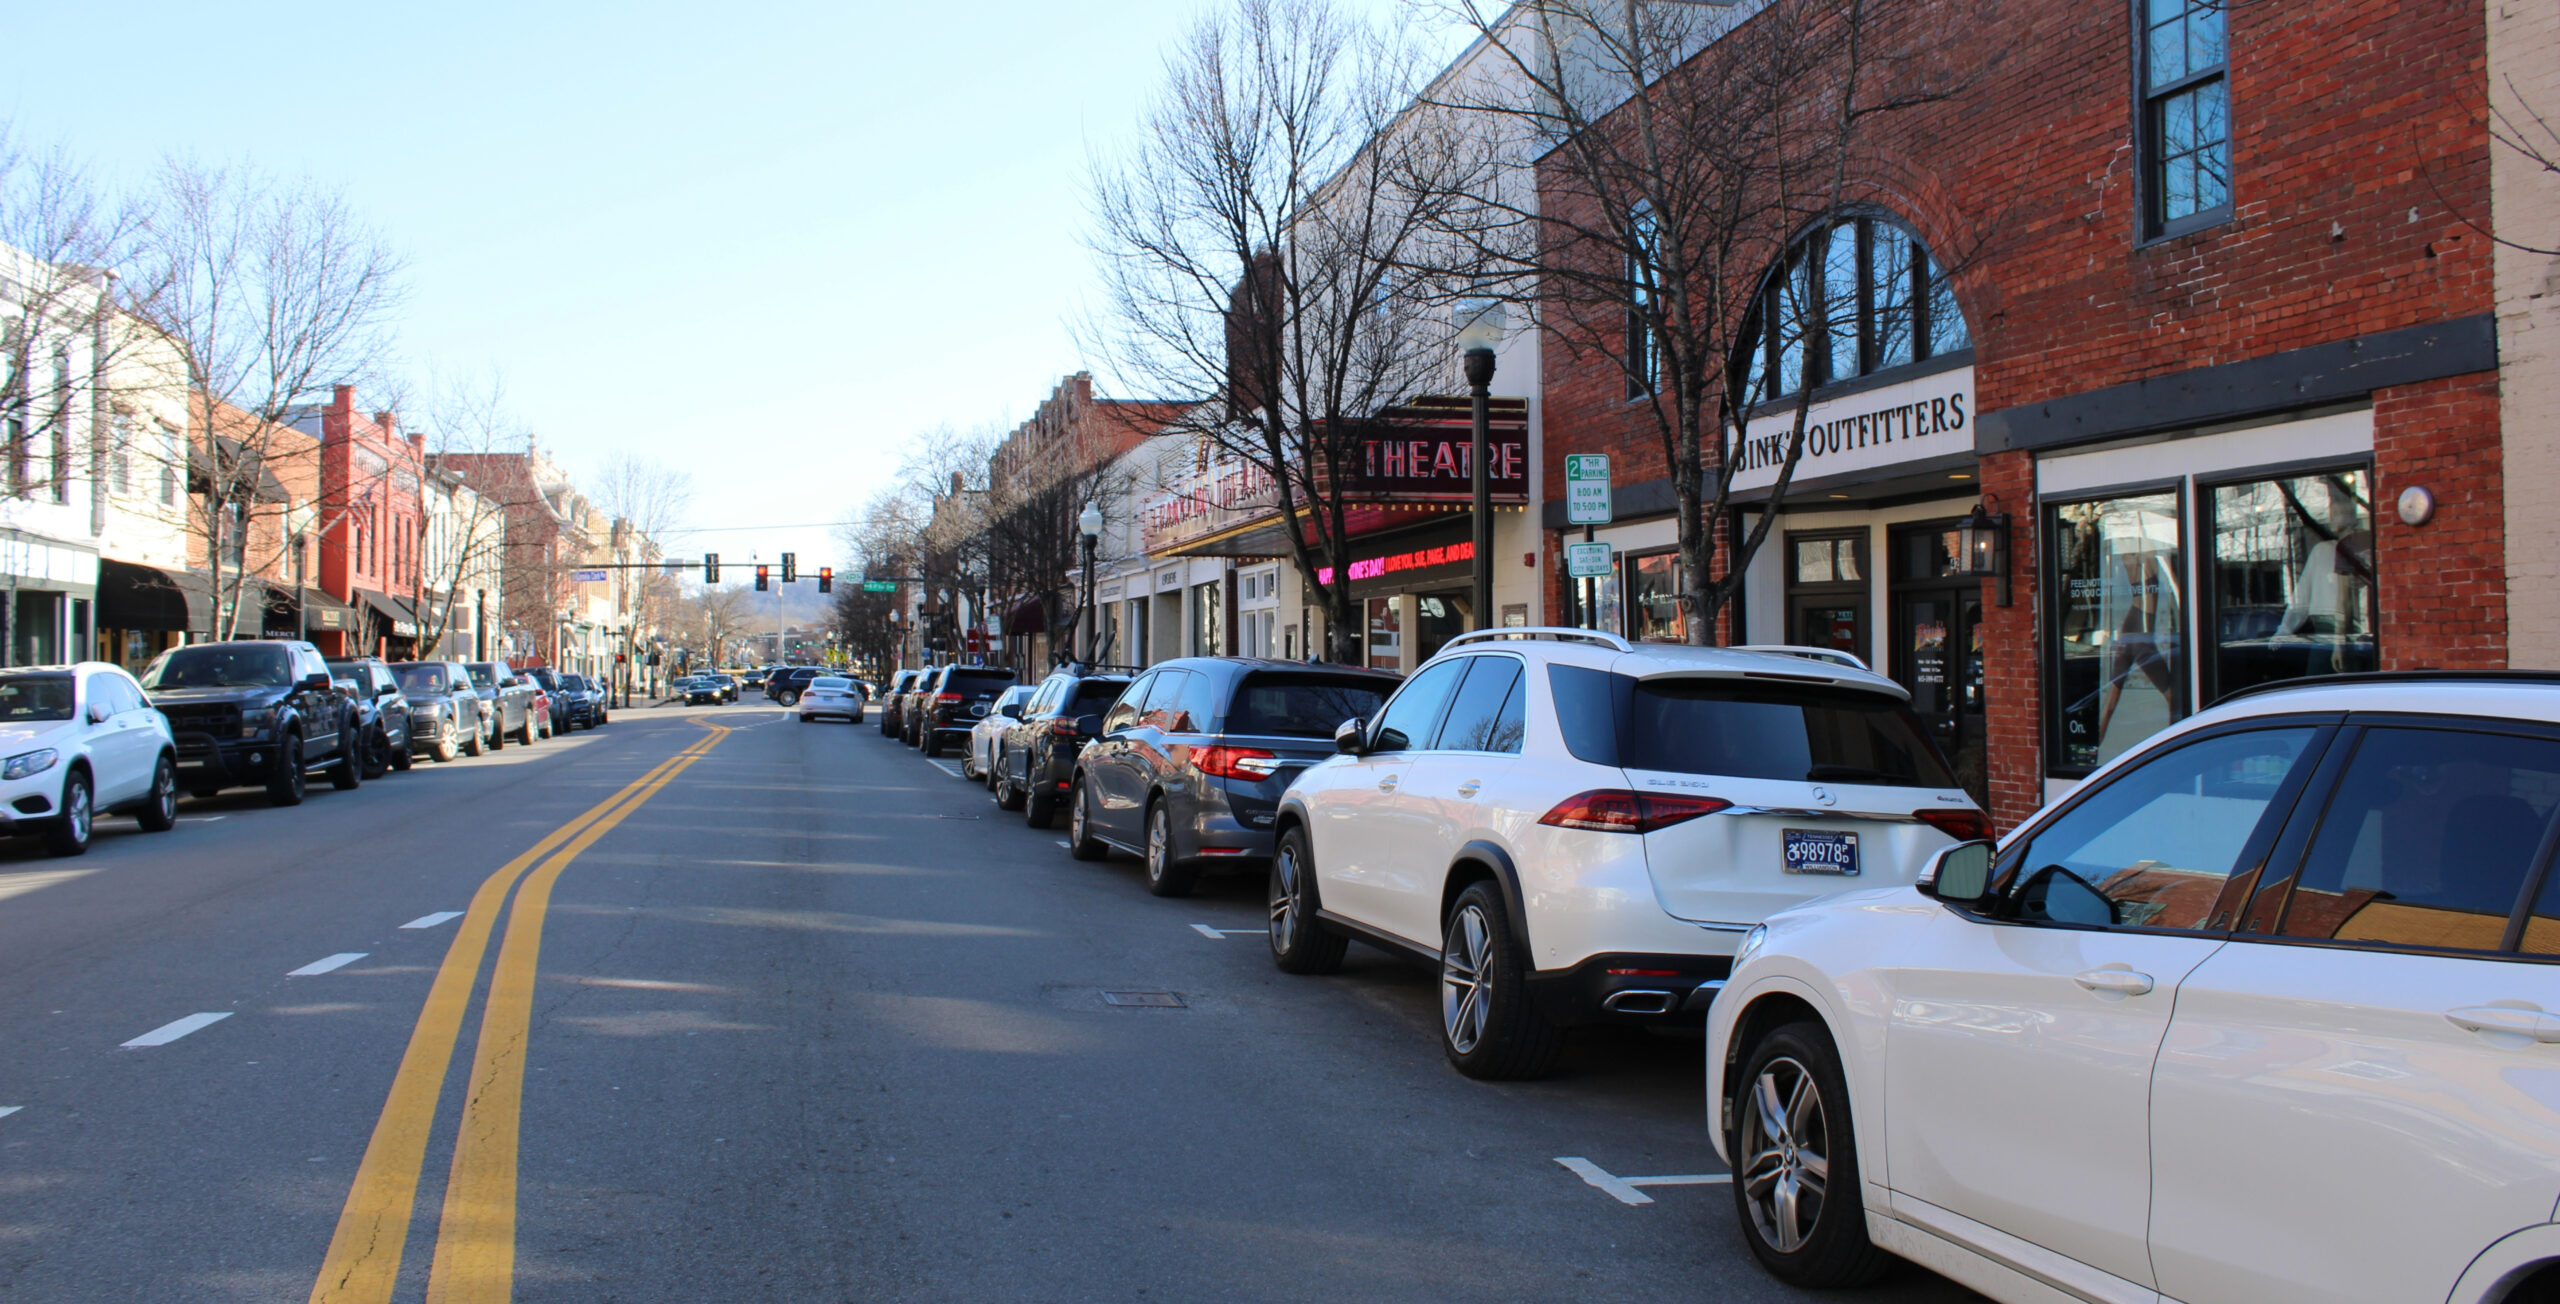 Downtown Franklin, Tennessee offers parking with cars on Main Street, or parking garages located near Main Street.